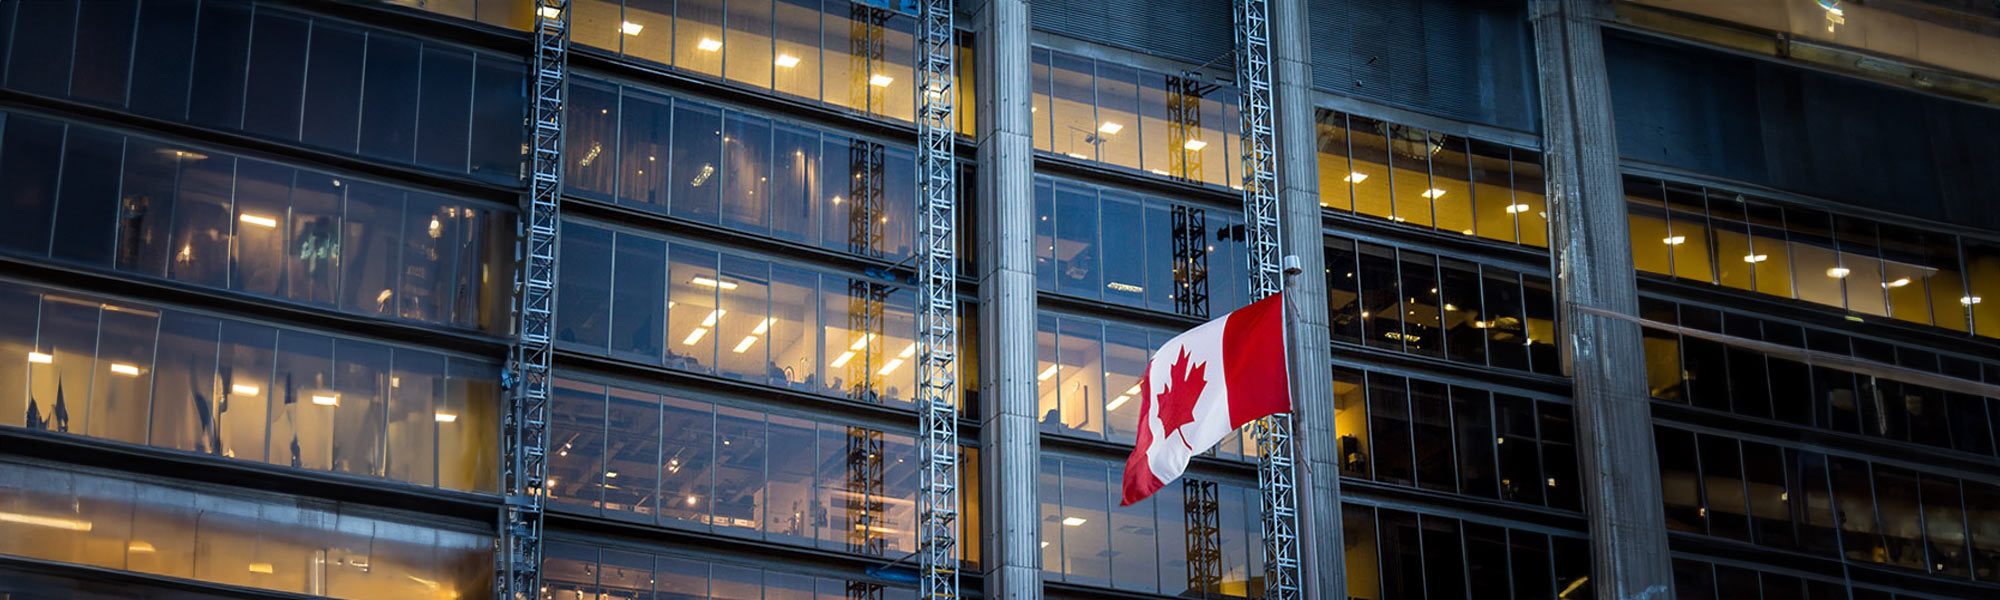 canadian flag flying outside of building